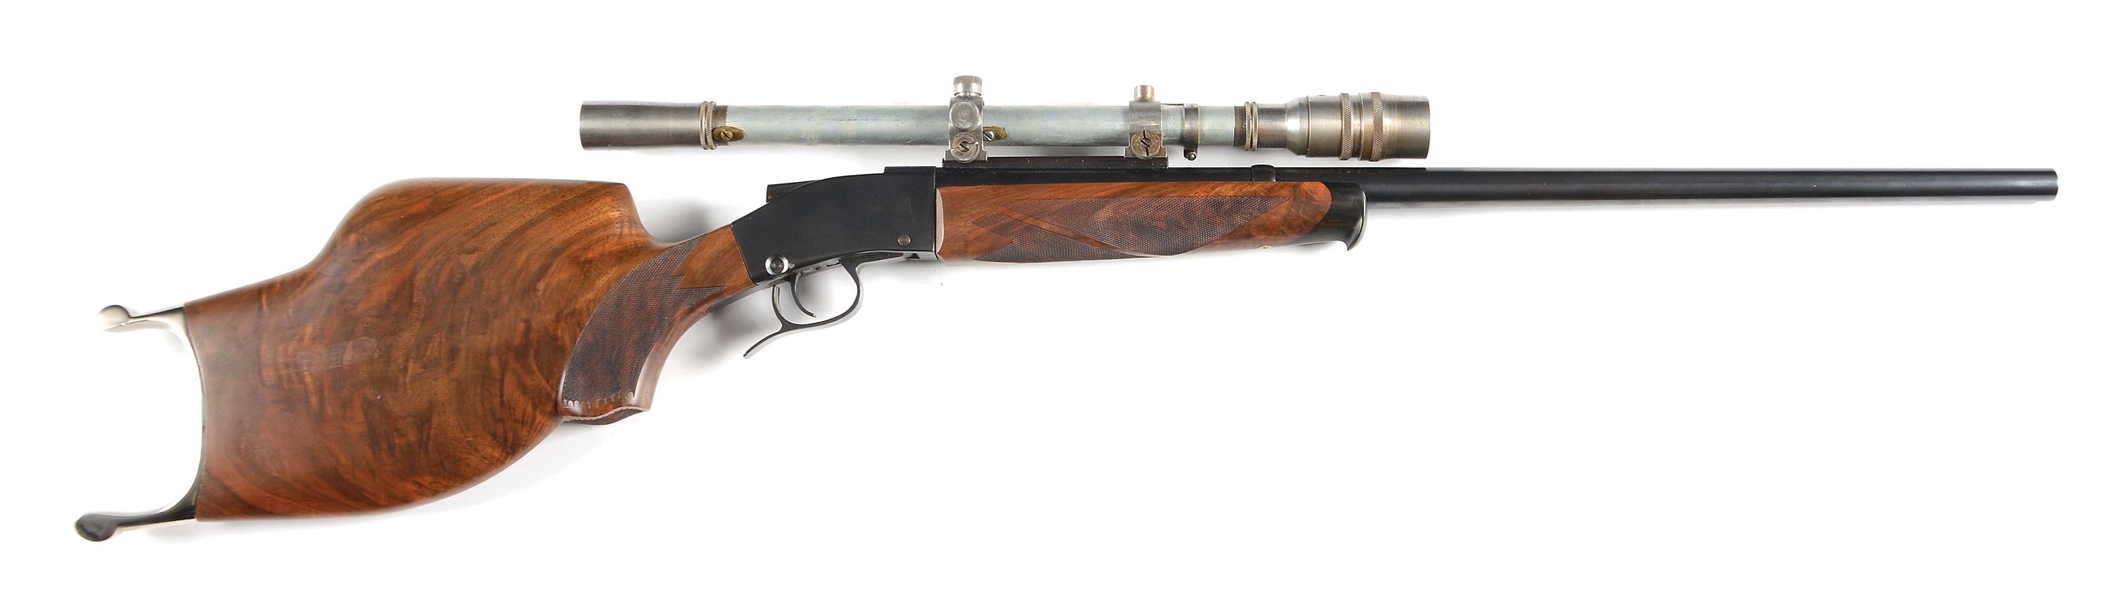 (M) HARRIMAN-BORCHARDT REPRODUCTION RIFLE WITH SCOPE.